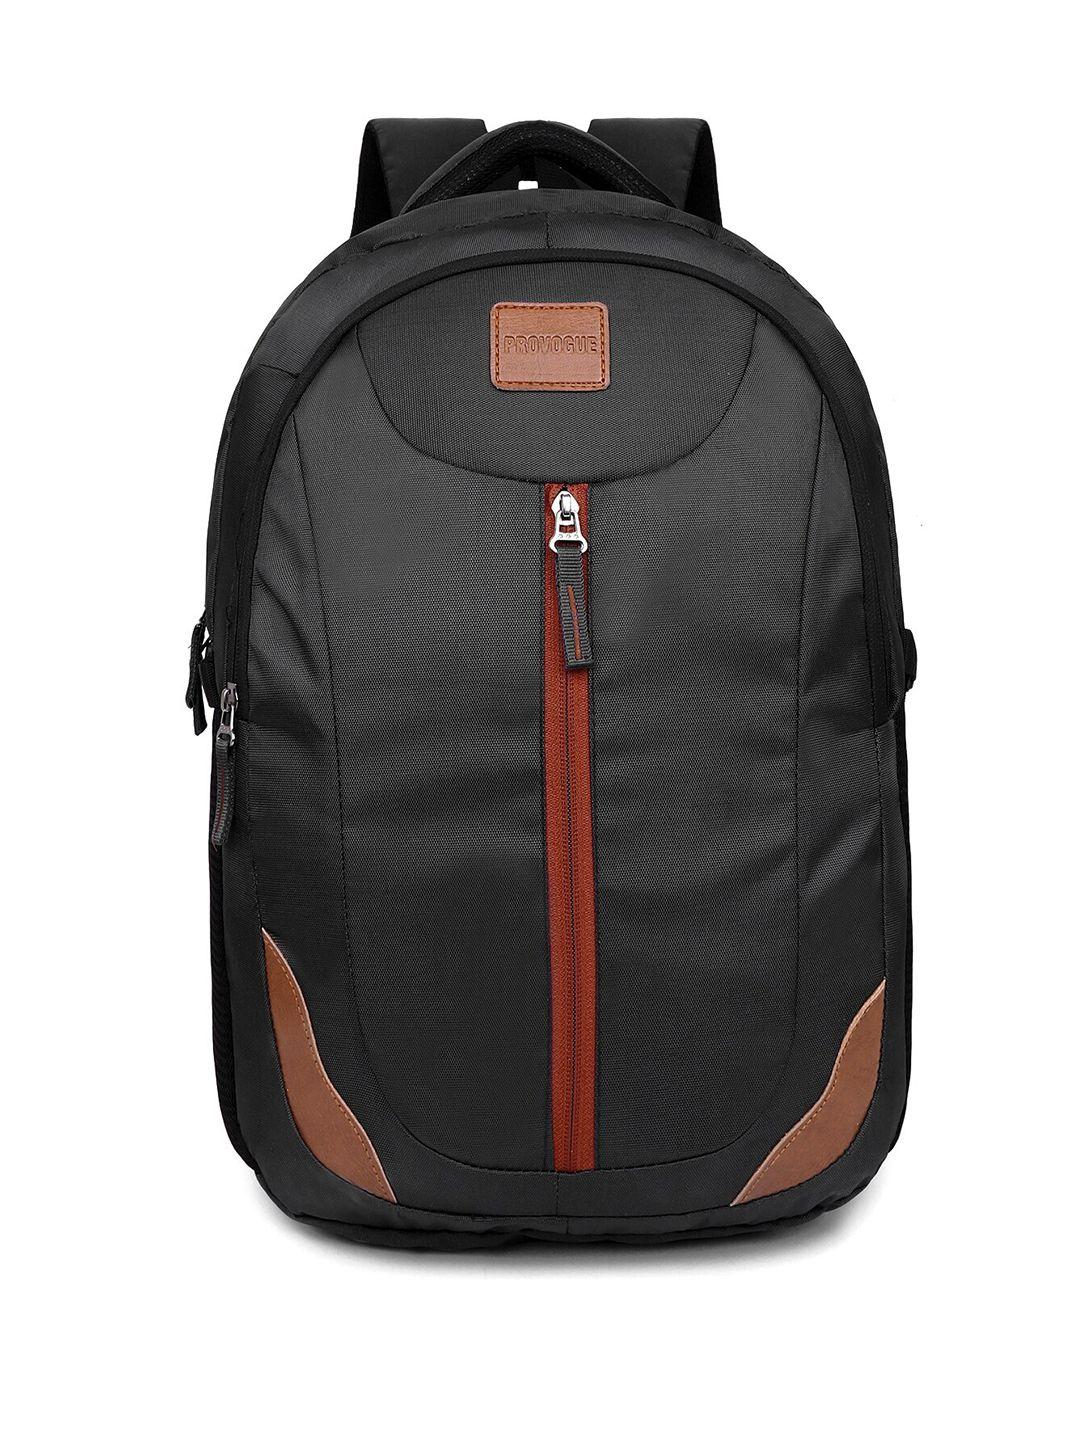 provogue unisex textured backpack-up to 18 inch